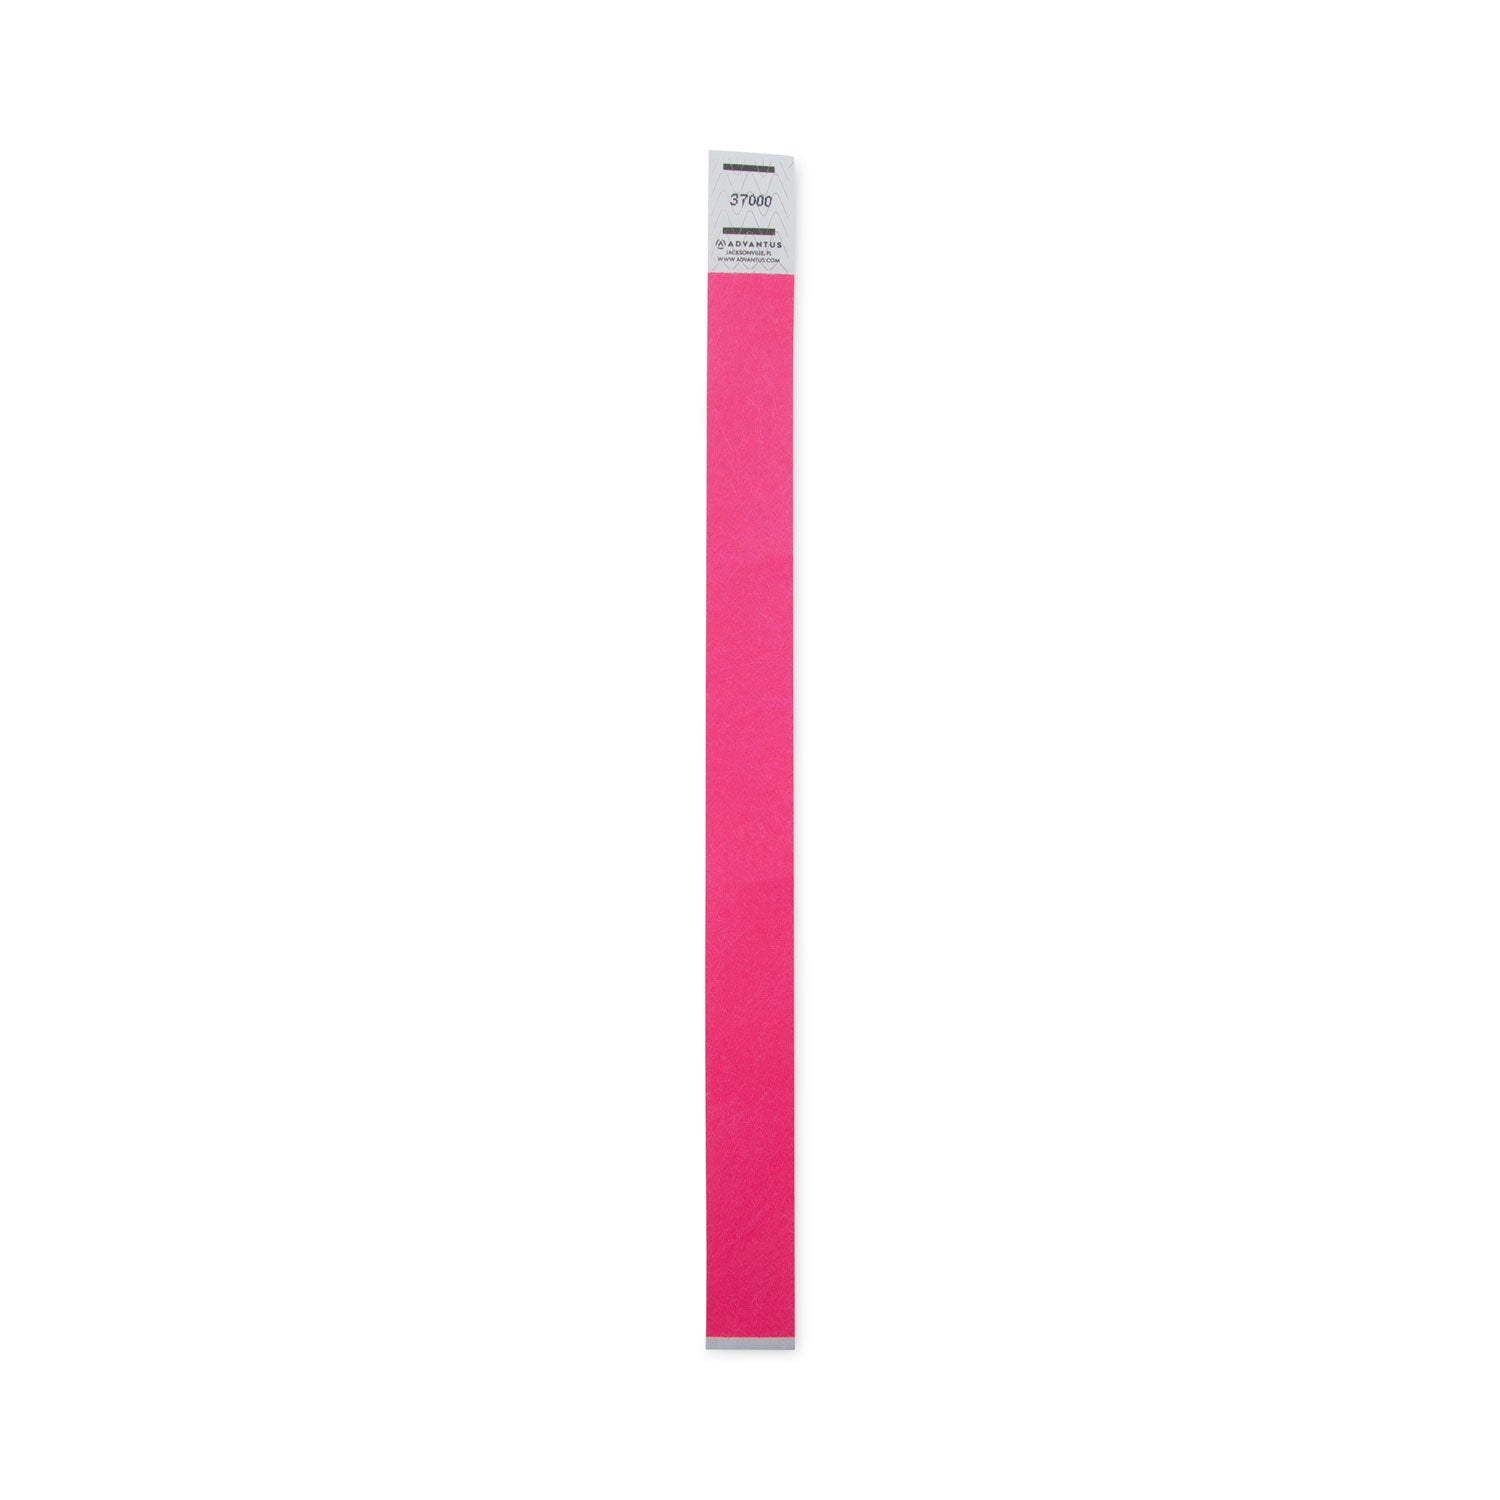 crowd-management-wristbands-sequentially-numbered-975-x-075-neon-pink-500-pack_avt91121 - 4